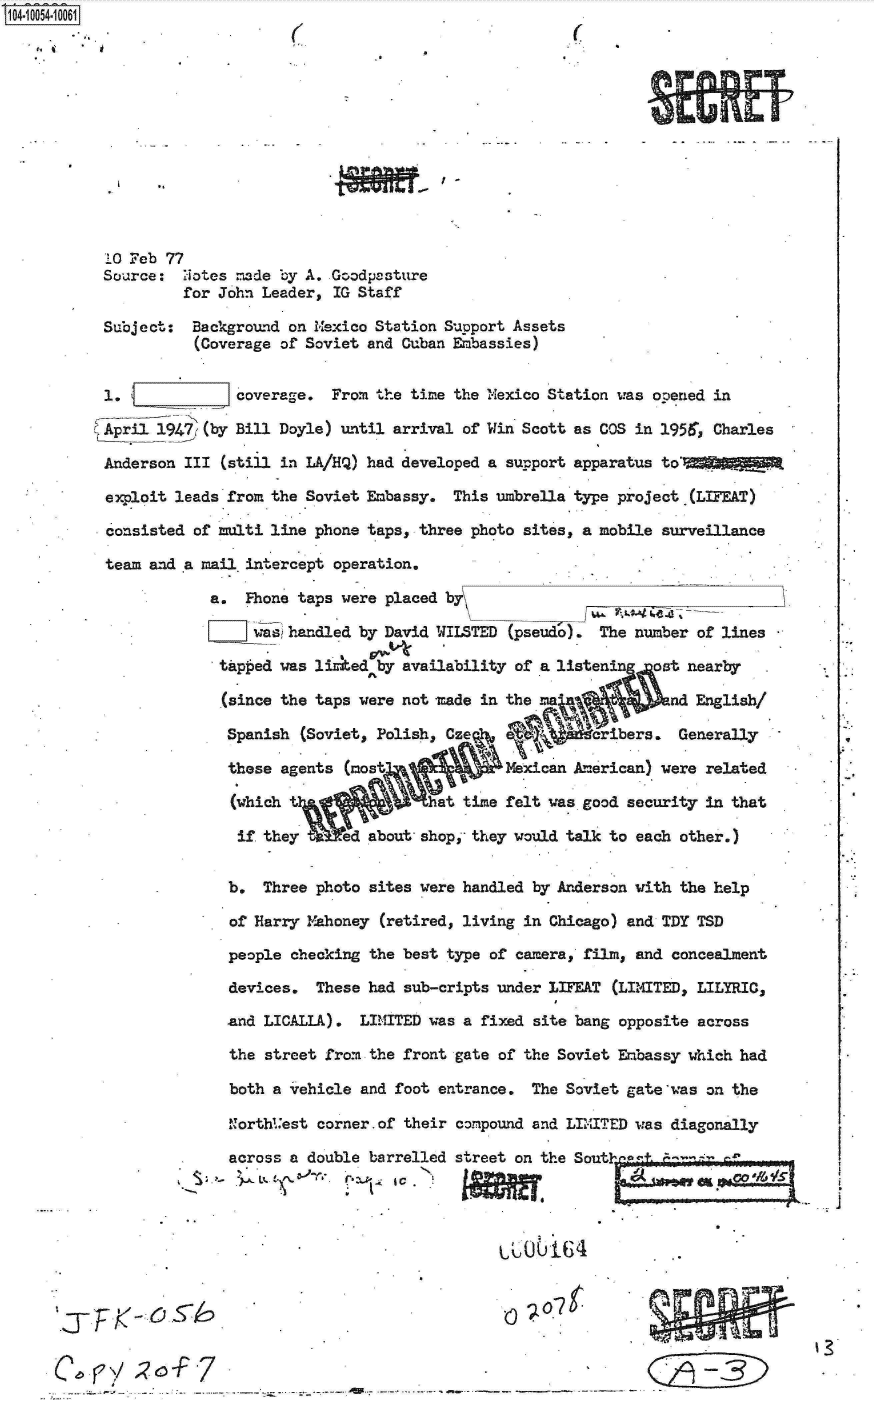 handle is hein.jfk/jfkarch07839 and id is 1 raw text is: 04 0054-10001













          10 Feb 77
          Source   Notes =de by A. Goodpasture
                   for John Leader, IG Staff

          Subject:  Background on Mexico Station Support Assets
                    (Coverage of Soviet and Cuban Embassies)


          1.            coverage. From the time the Mexico Station was opened in

          April 1947 (by Bill Doyle) until arrival of Win Scott as COS in 1951r, Charles

          Anderson III (still in LA/HQ) had developed a support apparatus to'

          exploit leads from the Soviet Embassy. This umbrella type project (LIFEAT)

          consisted of multi line phone taps, three photo sites, a mobile surveillance

          team and a mail.intercept operation.

                     a.  Fhone taps were placed by

                              handled by David WILSTED (psed o). The number of lines

                      tap ed was lirked by availability of a listenin ost nearby

                      (since the taps were not made in the             ad English/

                      Spanish  (Soviet, Polish, CzeA a i      aribers.  Generally

                      these  agents (most            Mexican Am rican) were related

                        (which tat time felt was good security in that

                        if they .ed   about shop, they would talk to each other.)


                        b. Three photo sites were handled by Anderson with the help

                        of Harry Mahoney (retired, living in Chicago) and TDY TSD

                        people checking the best type of camera, film, and concealment

                        devices. These had sub-cripts under LIFEAT (LIMITED, LILYRIC,

                        and LICALLA). LIMITED was a fixed site bang opposite across

                        the street from the front gate of the Soviet Embassy which had

                        both a vehicle and foot entrance. The Soviet gate'was on the

                        Northl.'est corner.of their compound and LIITED was diagonally

                        across a double barrelled street on the Soutin a+




                                              *      &0UU164.
              'j~K-O5




     C.yj'-F7jF


